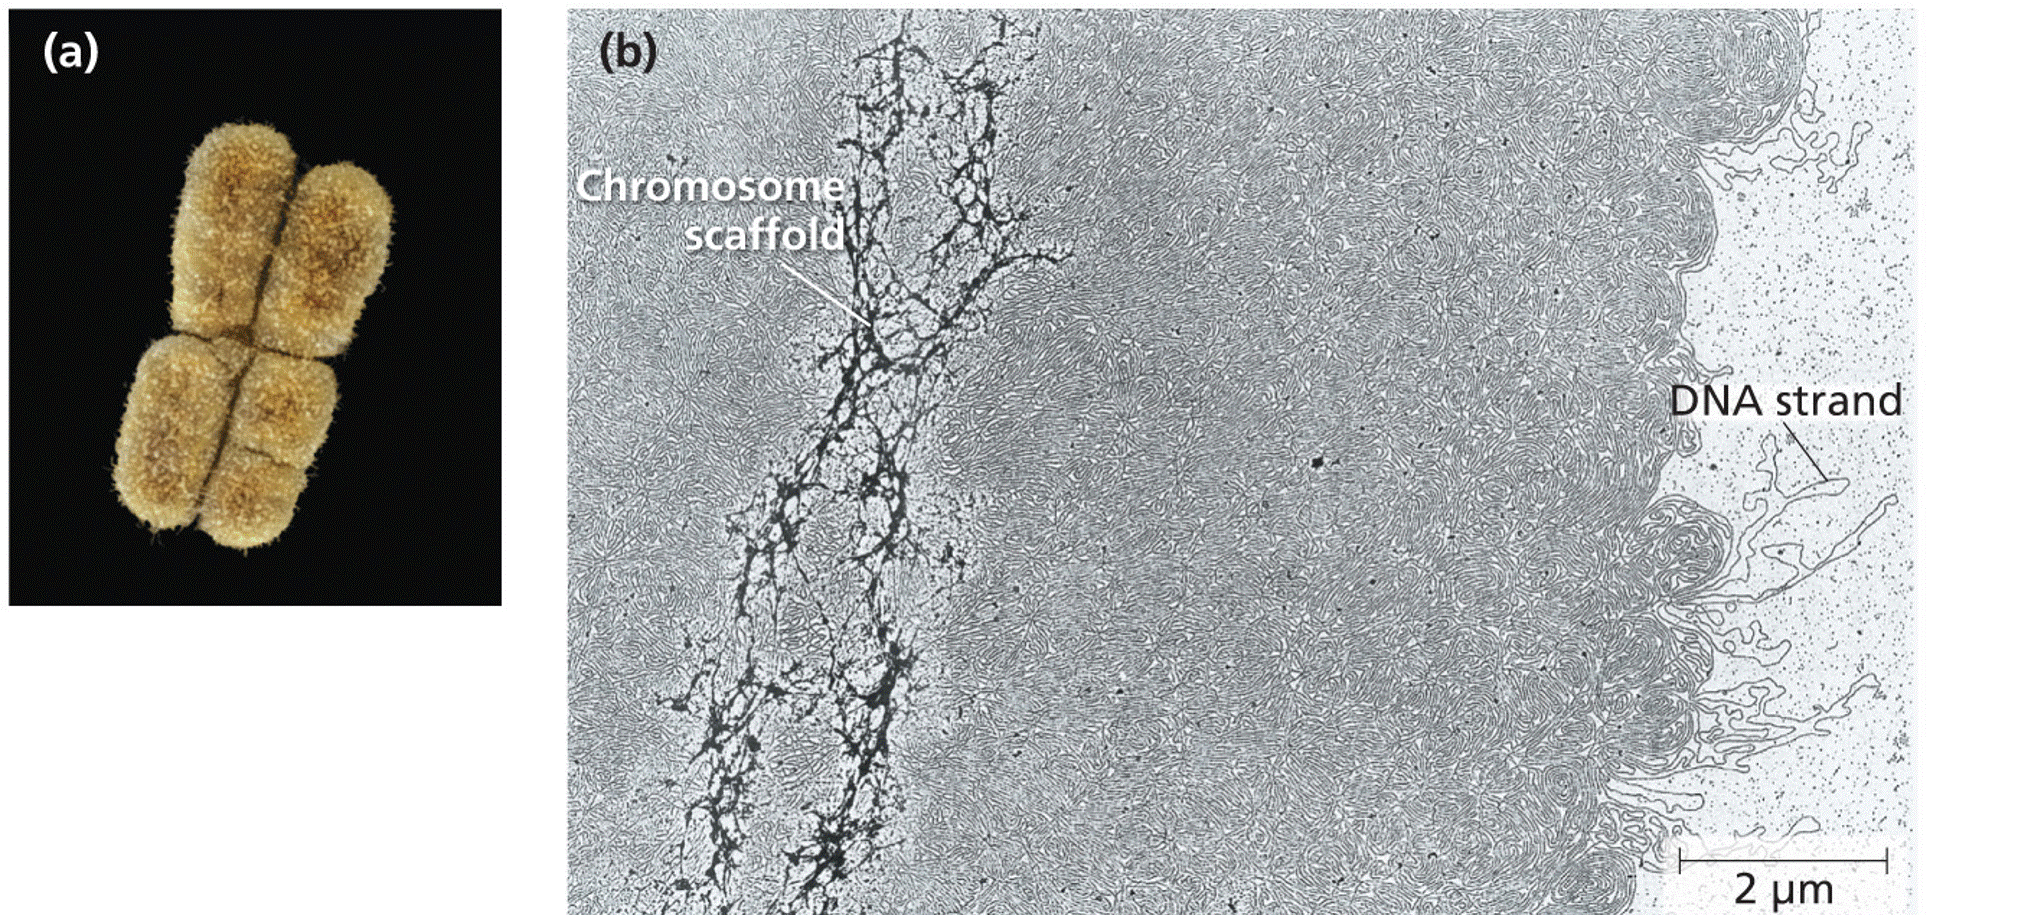 The chromosome scaffold of a metaphase chromosome